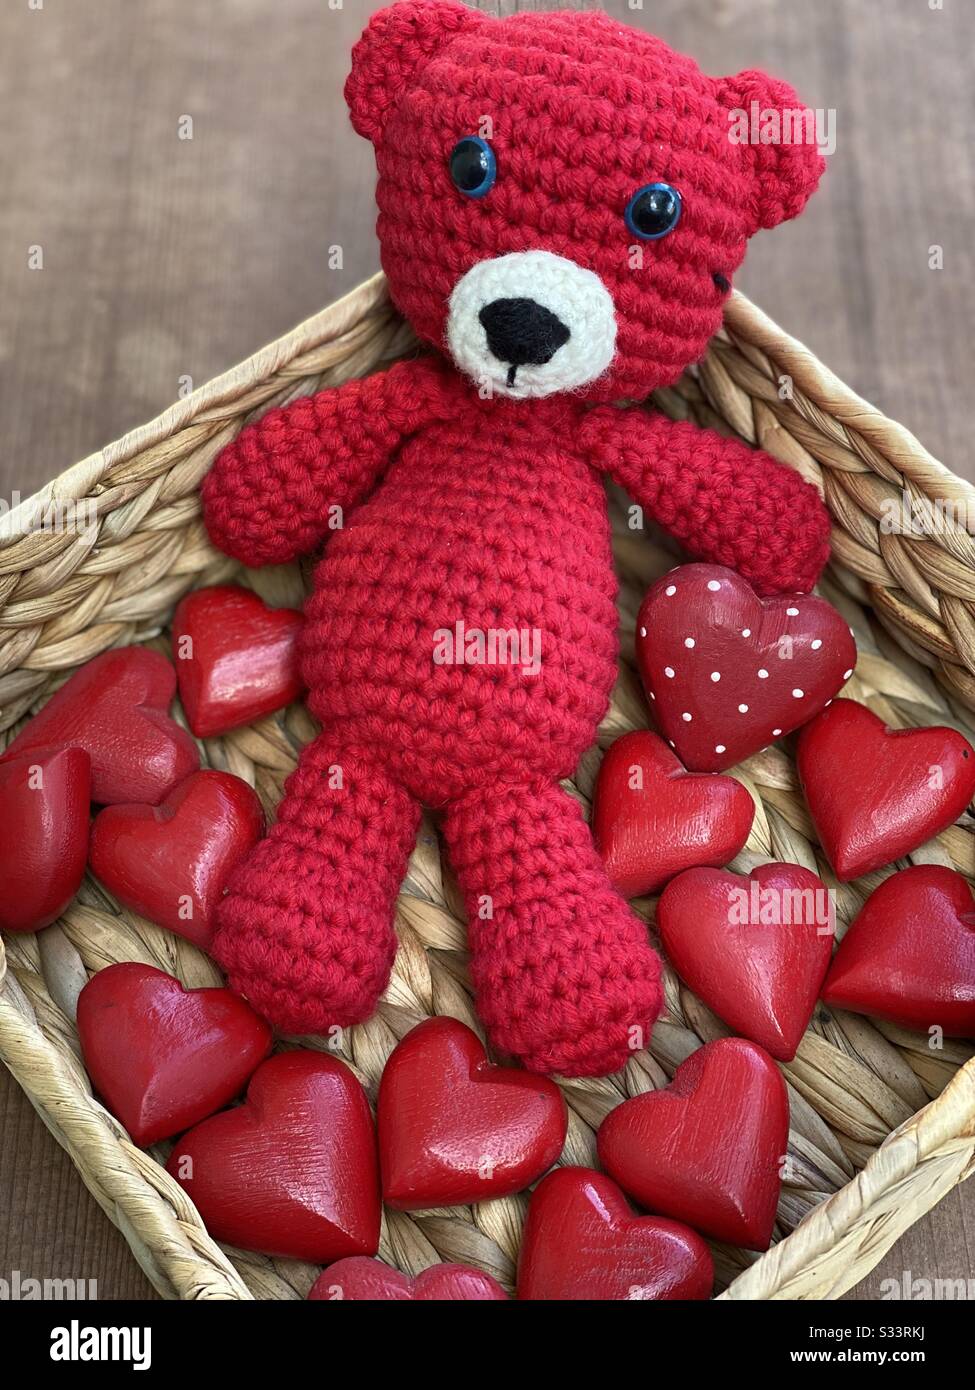 My lovely red wool bear Stock Photo